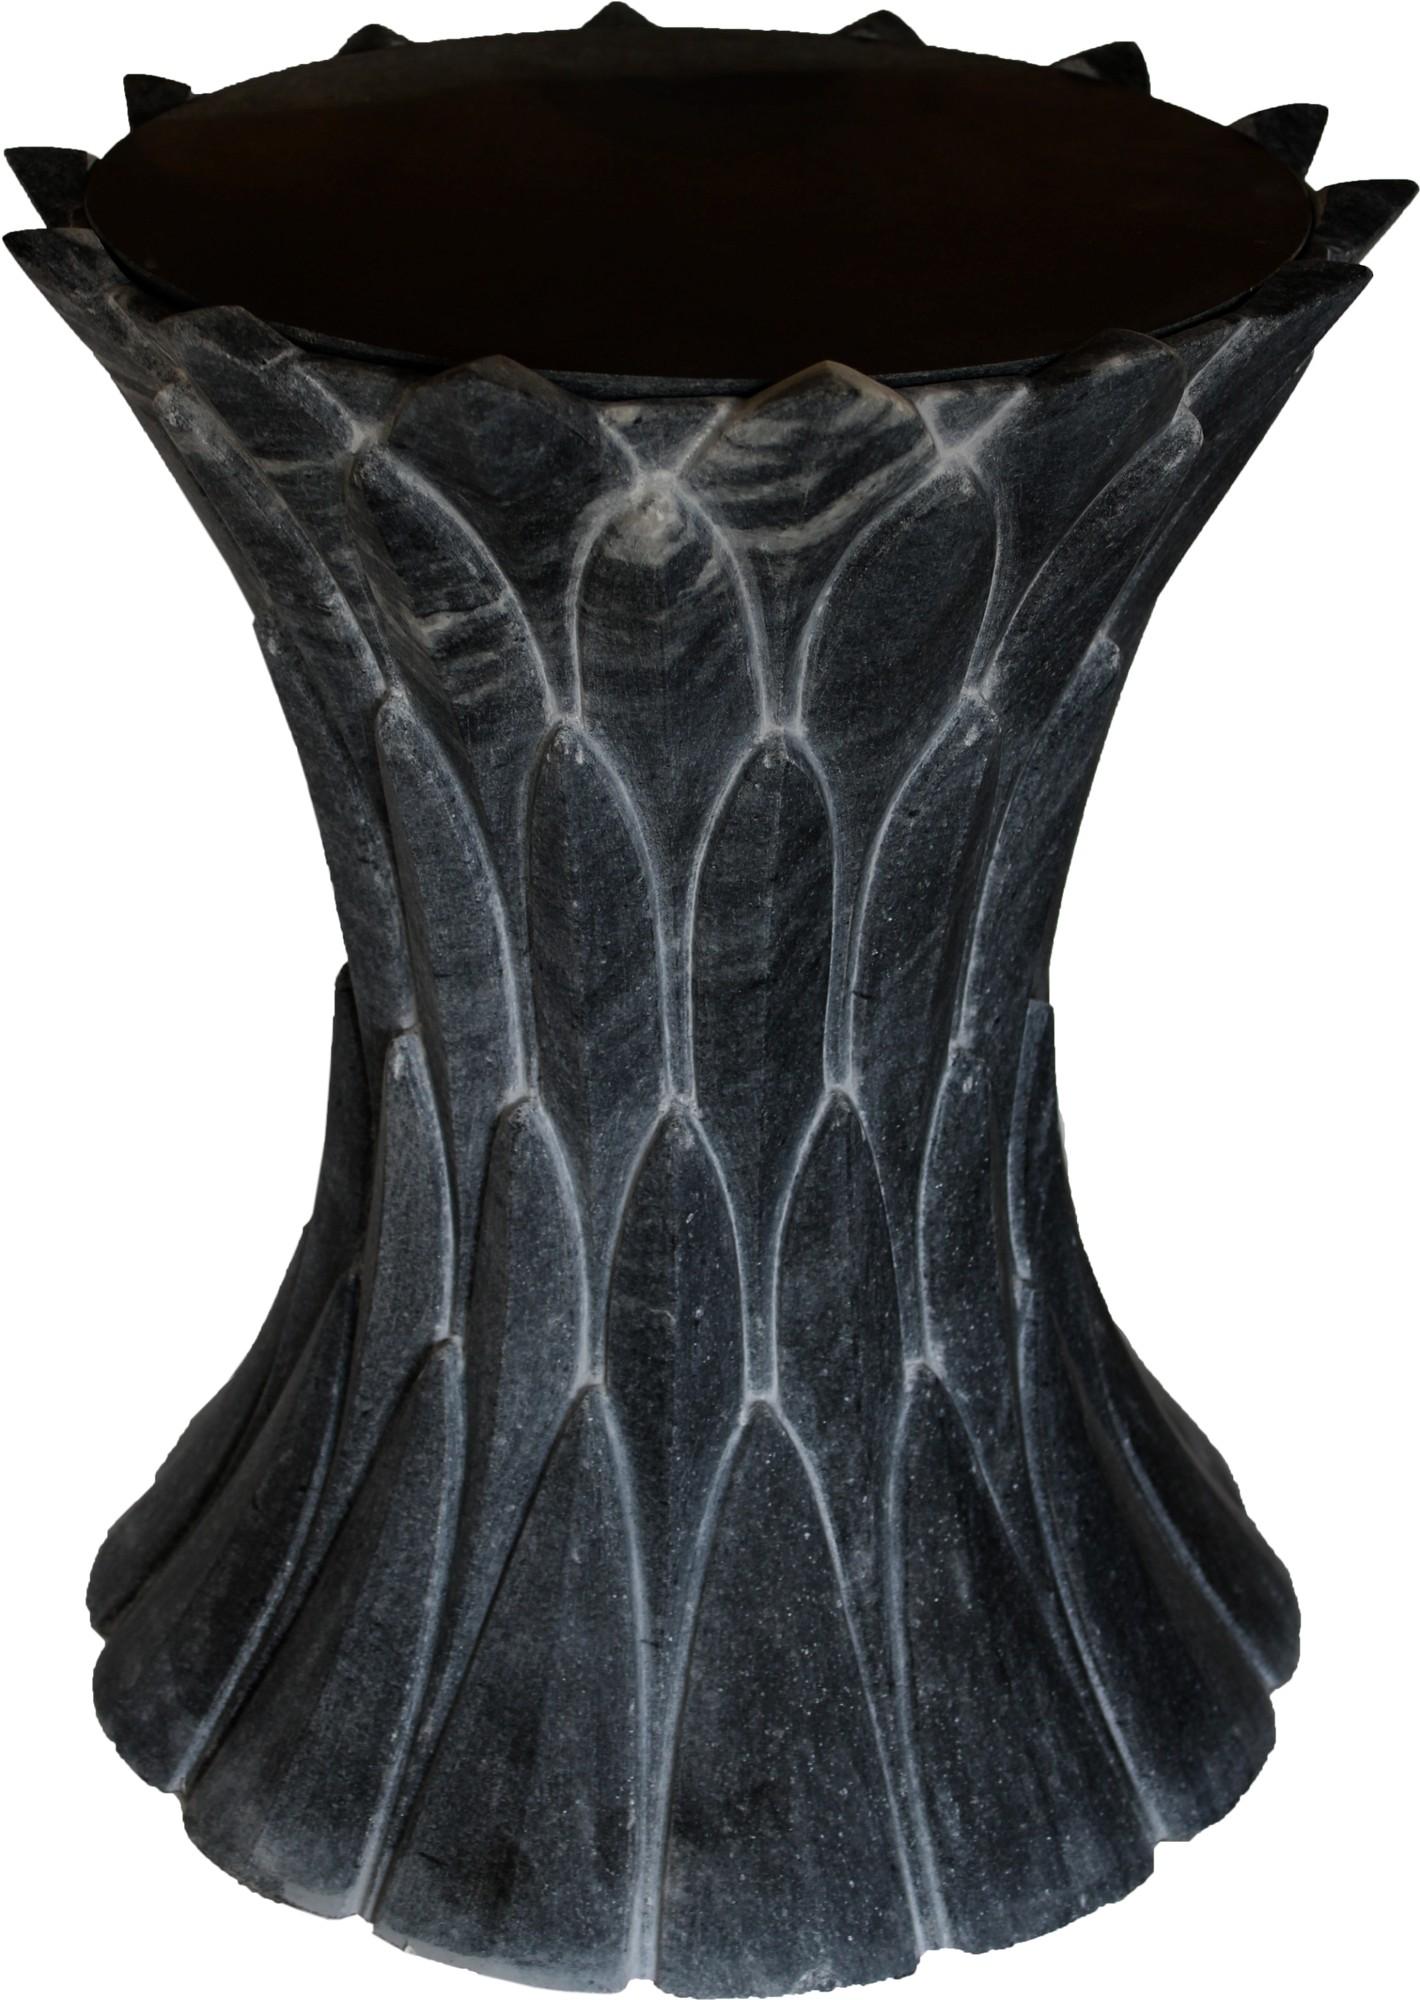 Other Set of Two Feathers Side Tables in Beslana Black Marble Handcrafted in India For Sale